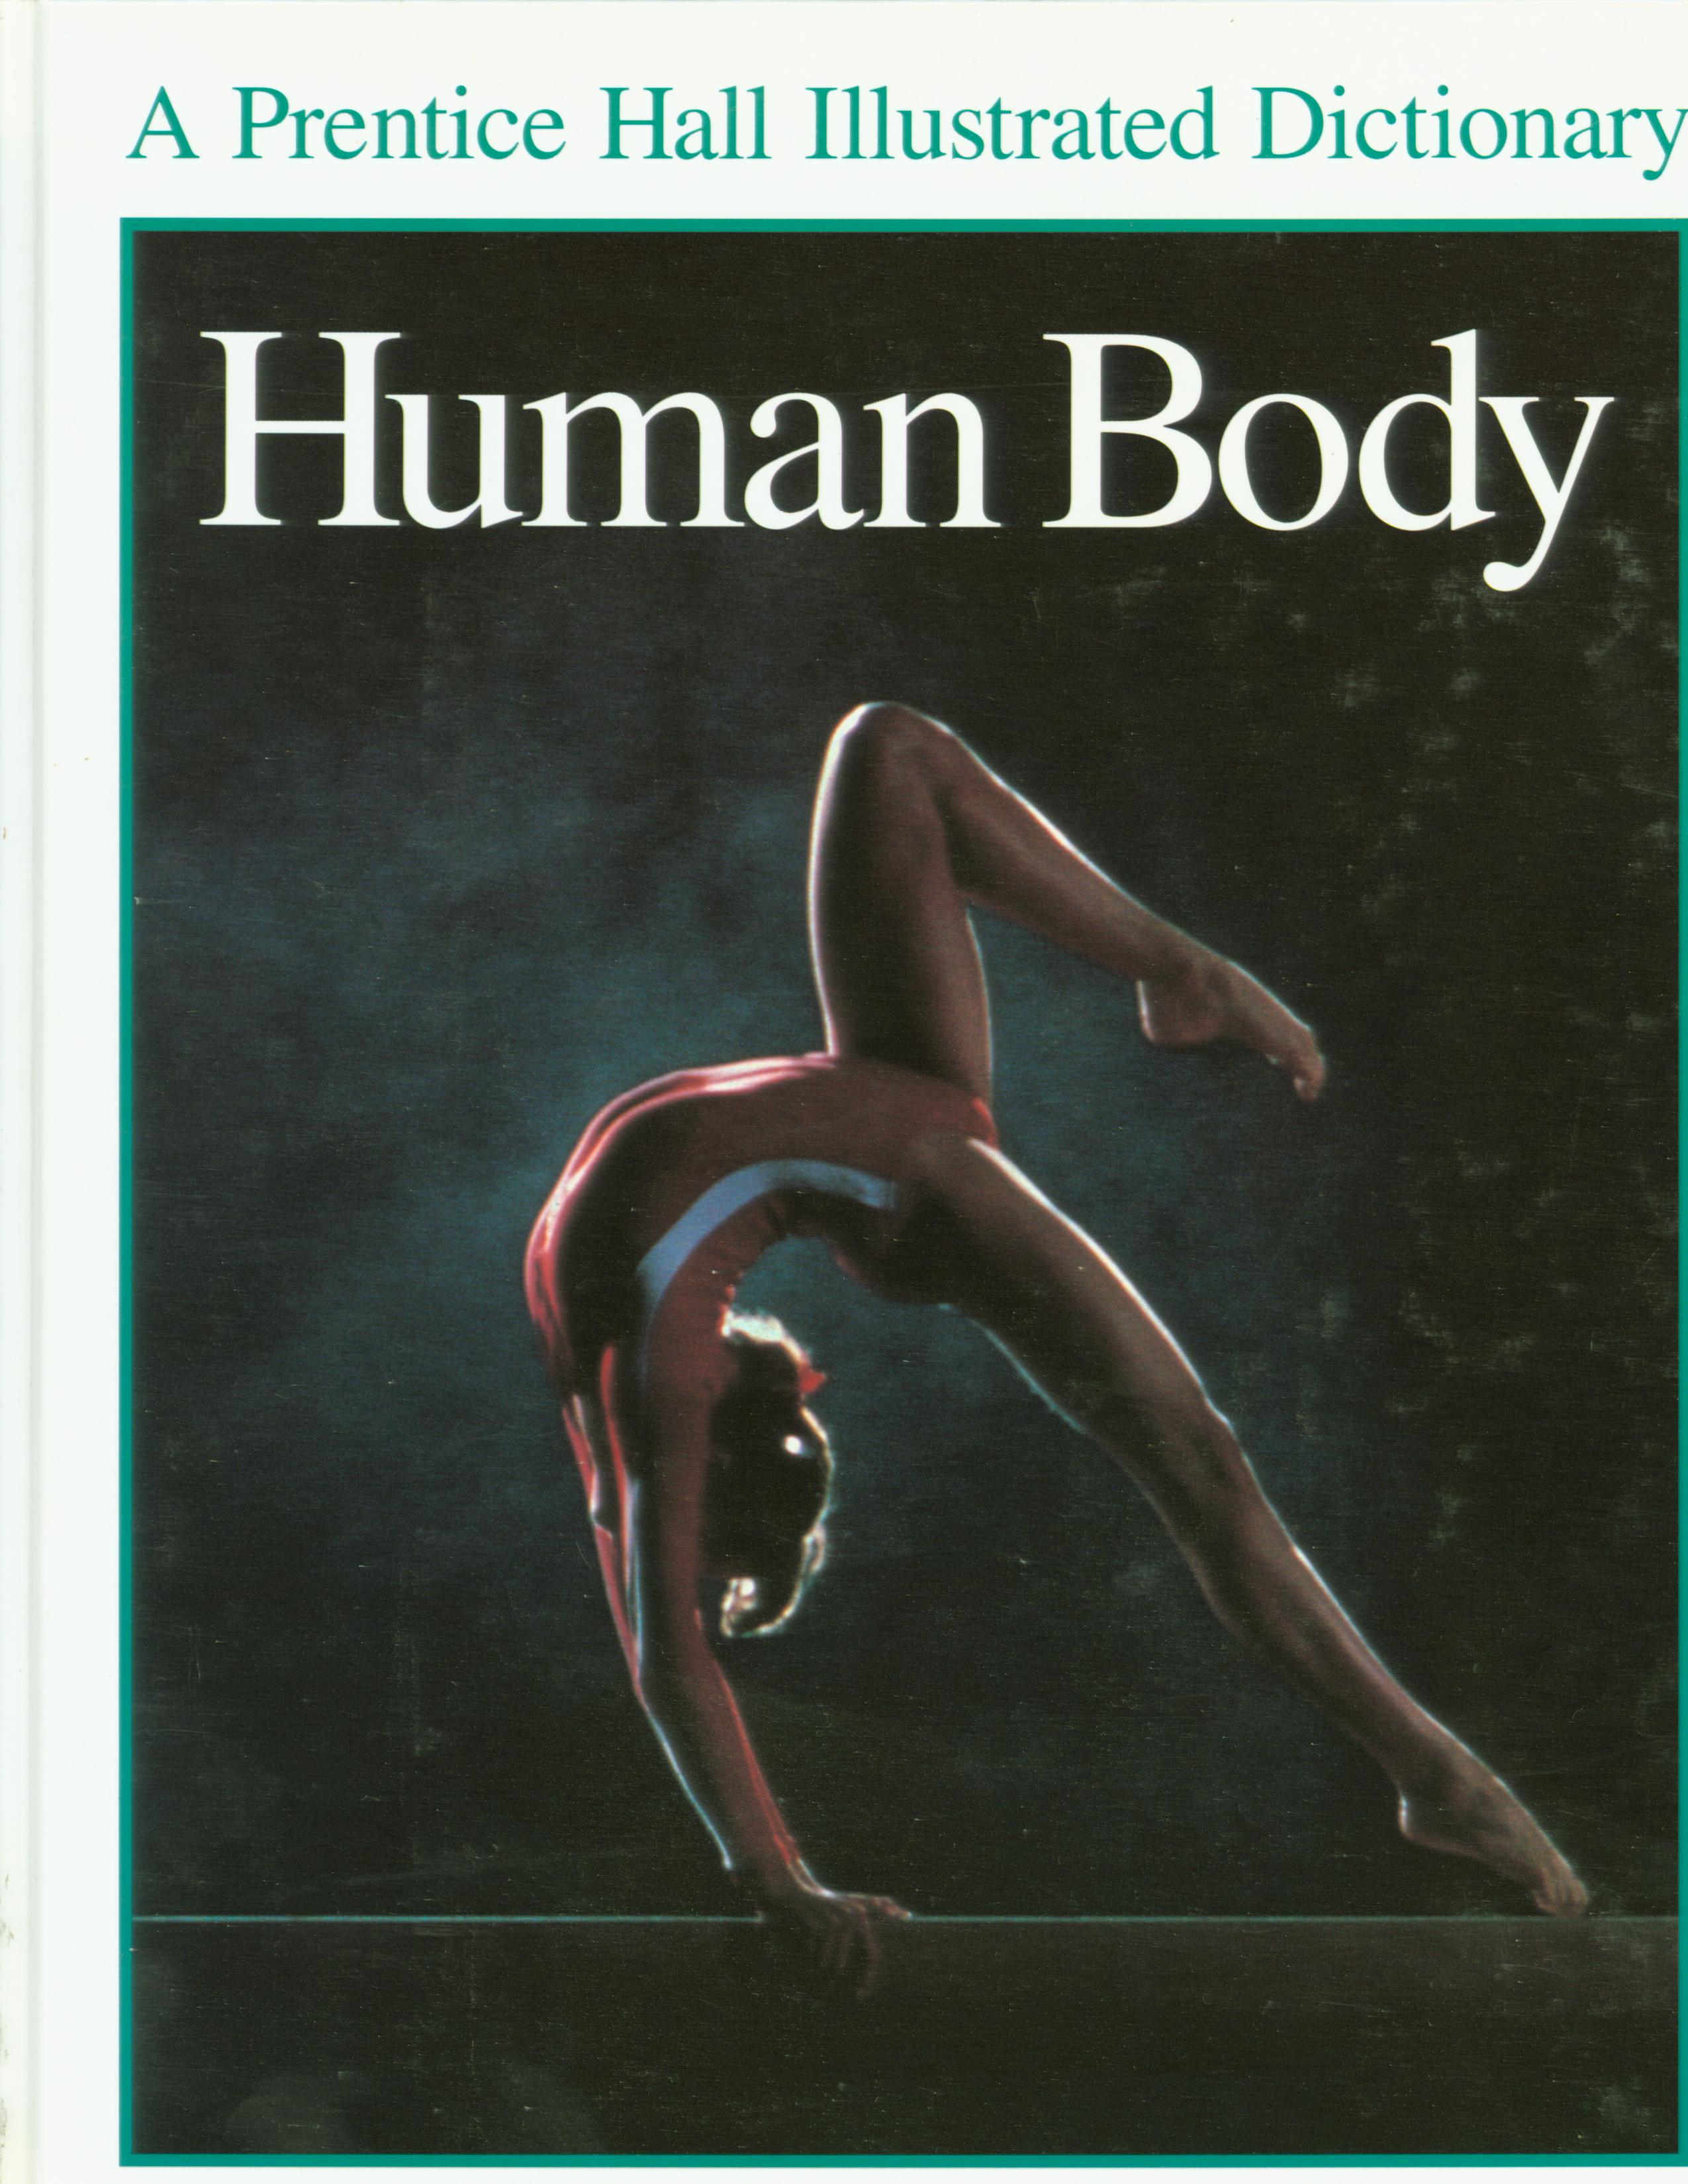 HUMAN BODY: a Prentice Hall Illustrated Dictionary. 